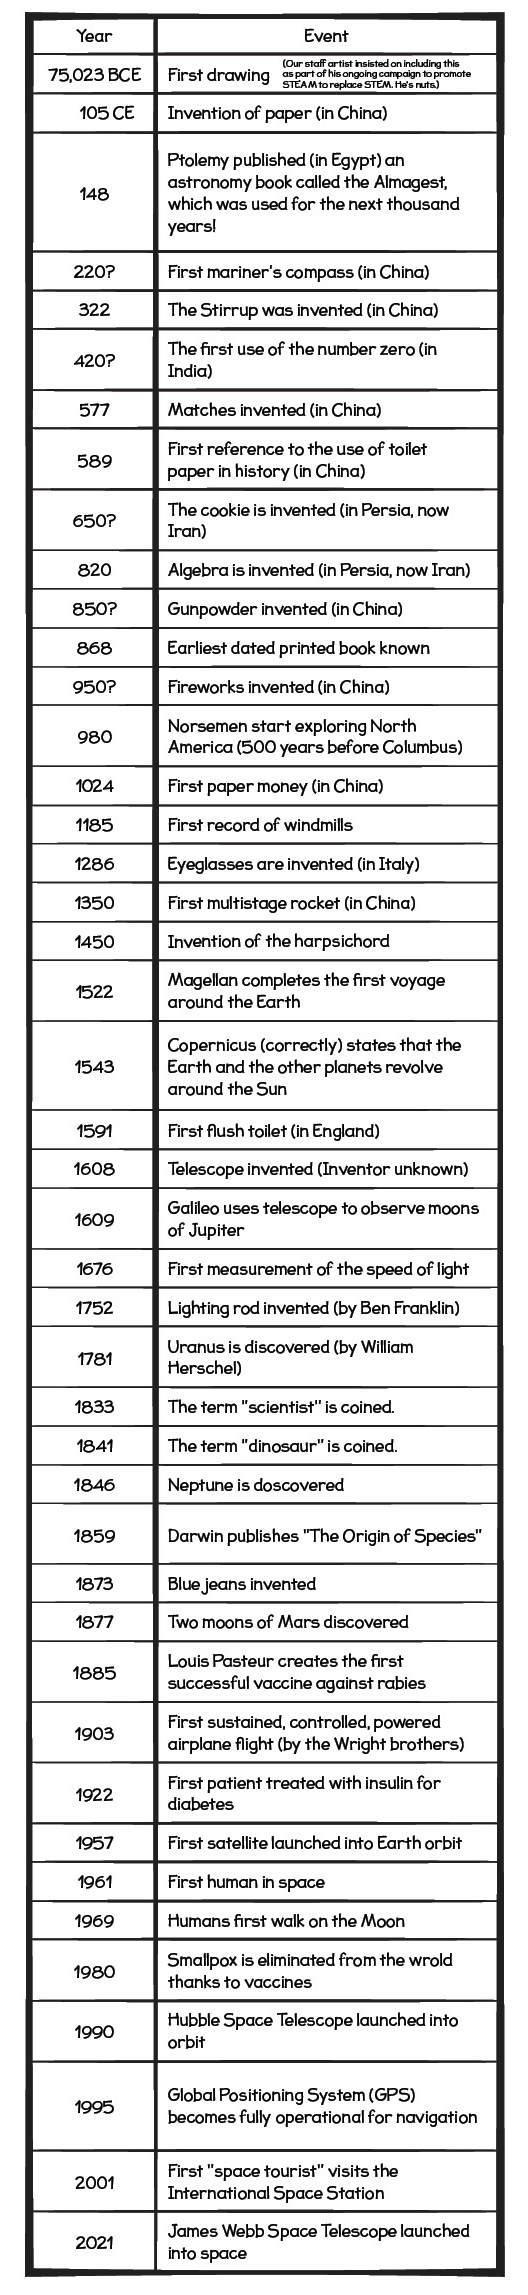 Selected STEM events from the past 2,000 years.